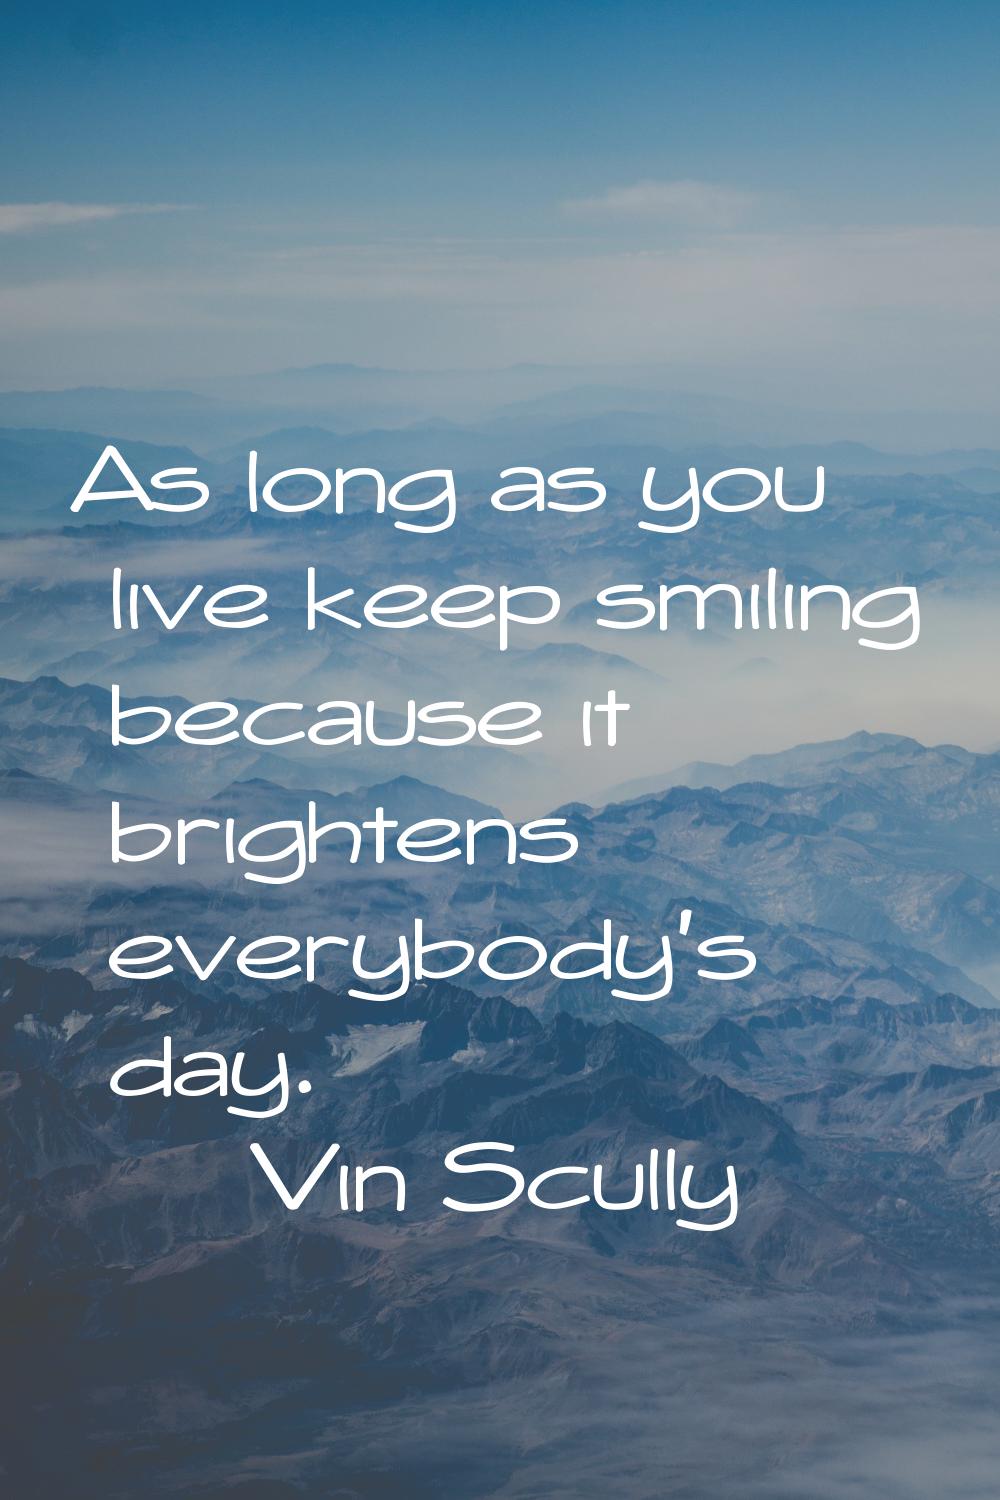 As long as you live keep smiling because it brightens everybody's day.